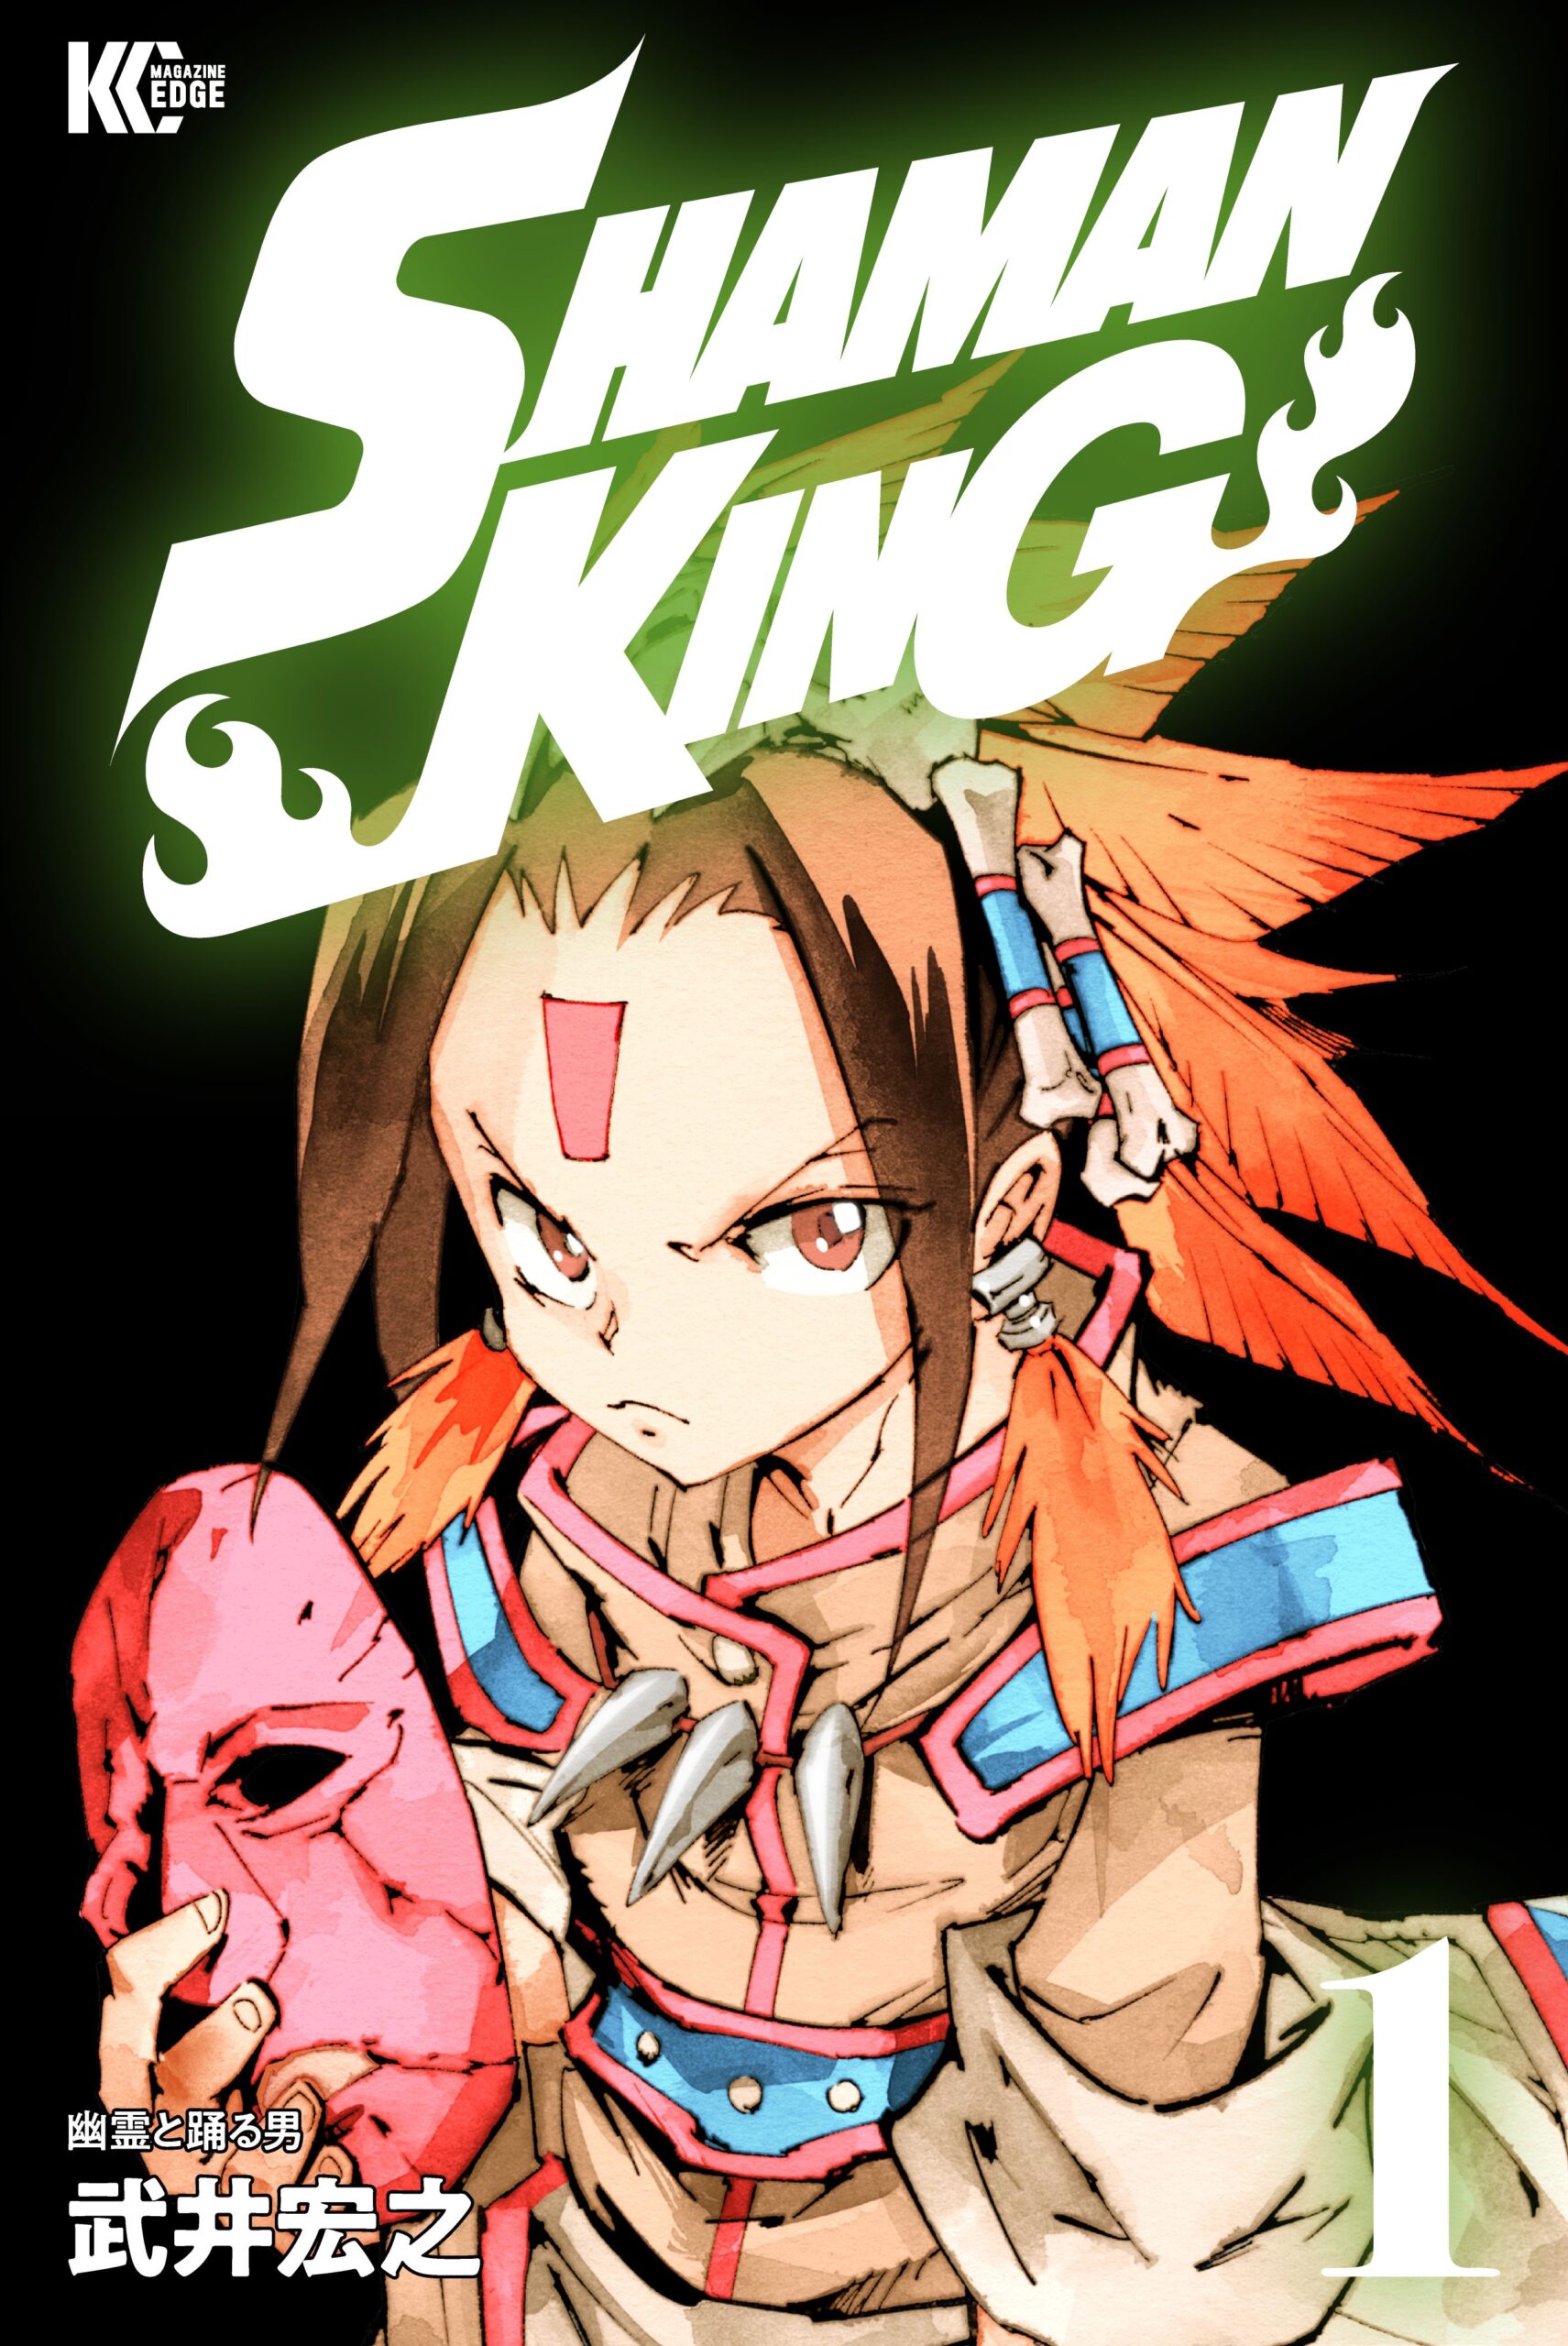 What S Different In The 35 Volume Edition Of The Shaman King Manga Patch Cafe